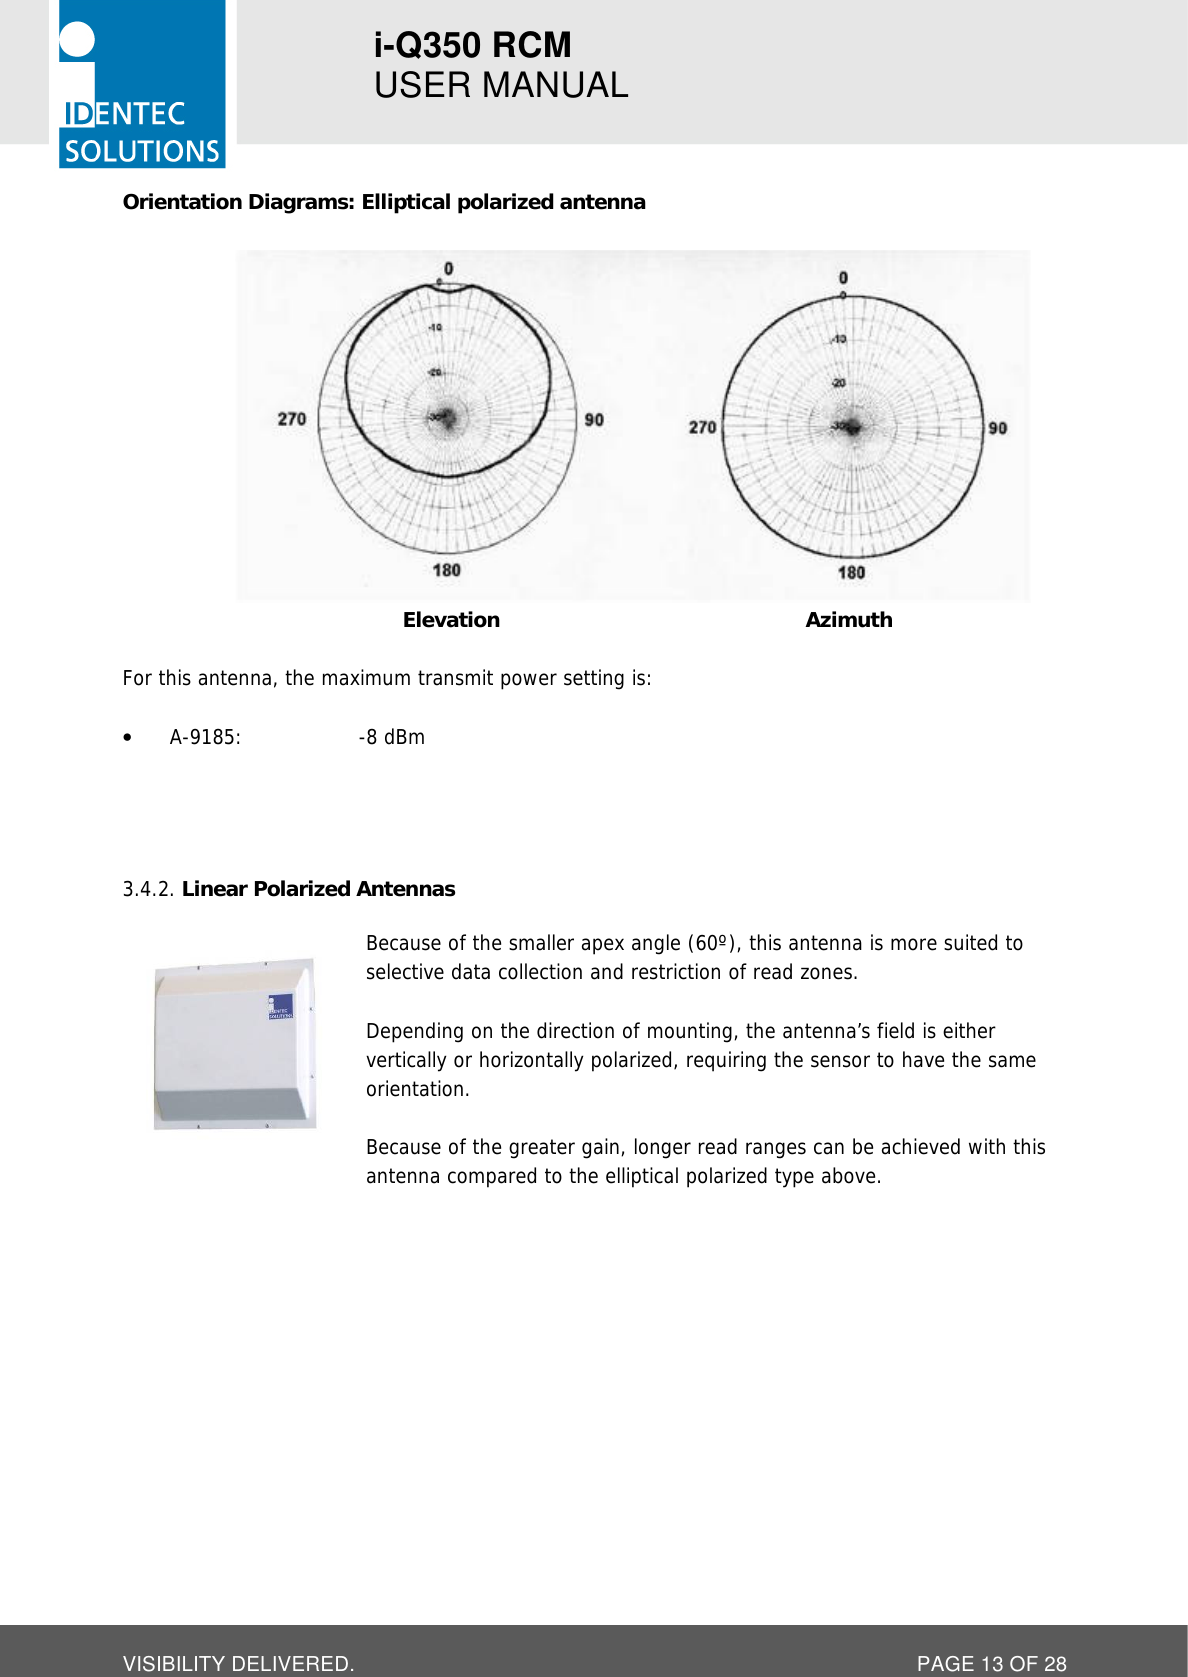 i-Q350 RCM   USER MANUAL  VISIBILITY DELIVERED.  PAGE 13 OF 28 Orientation Diagrams: Elliptical polarized antenna    Elevation Azimuth  For this antenna, the maximum transmit power setting is:  • A-9185:    -8 dBm     Linear Polarized Antennas 3.4.2. Because of the smaller apex angle (60º), this antenna is more suited to selective data collection and restriction of read zones.  Depending on the direction of mounting, the antenna’s field is either vertically or horizontally polarized, requiring the sensor to have the same orientation.   Because of the greater gain, longer read ranges can be achieved with this antenna compared to the elliptical polarized type above.     